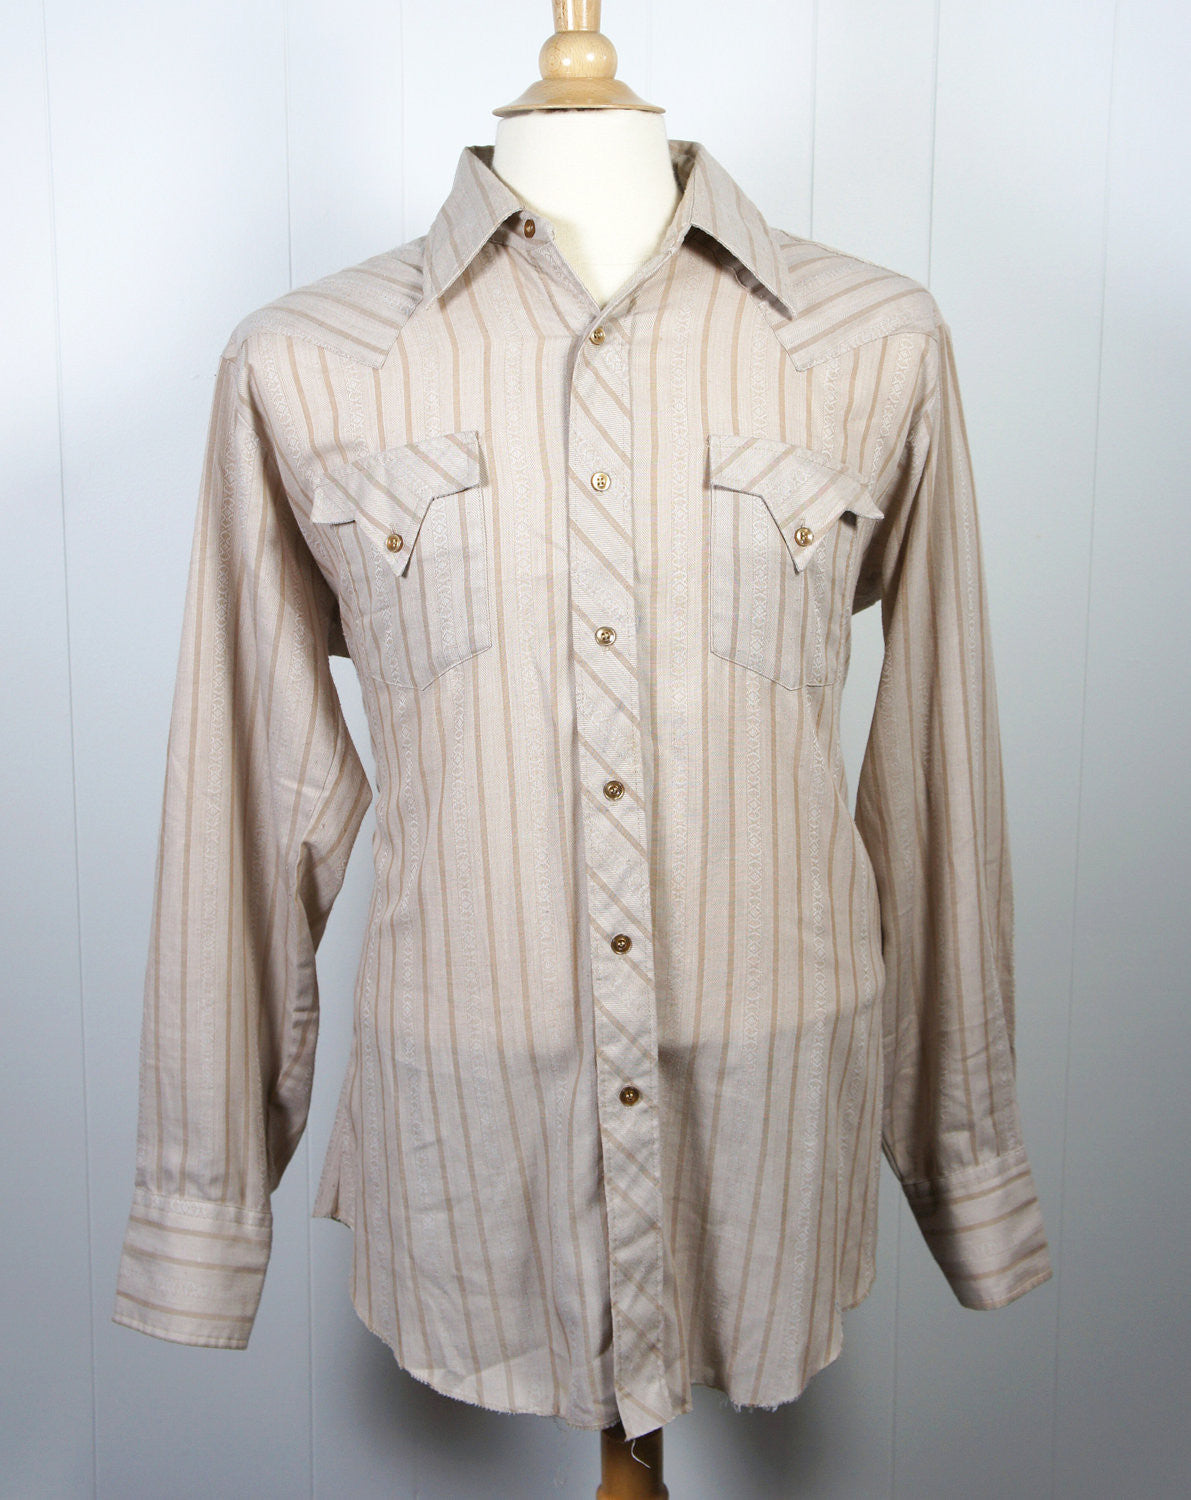 1970's Brown Striped Button Up Western Shirt - Size L